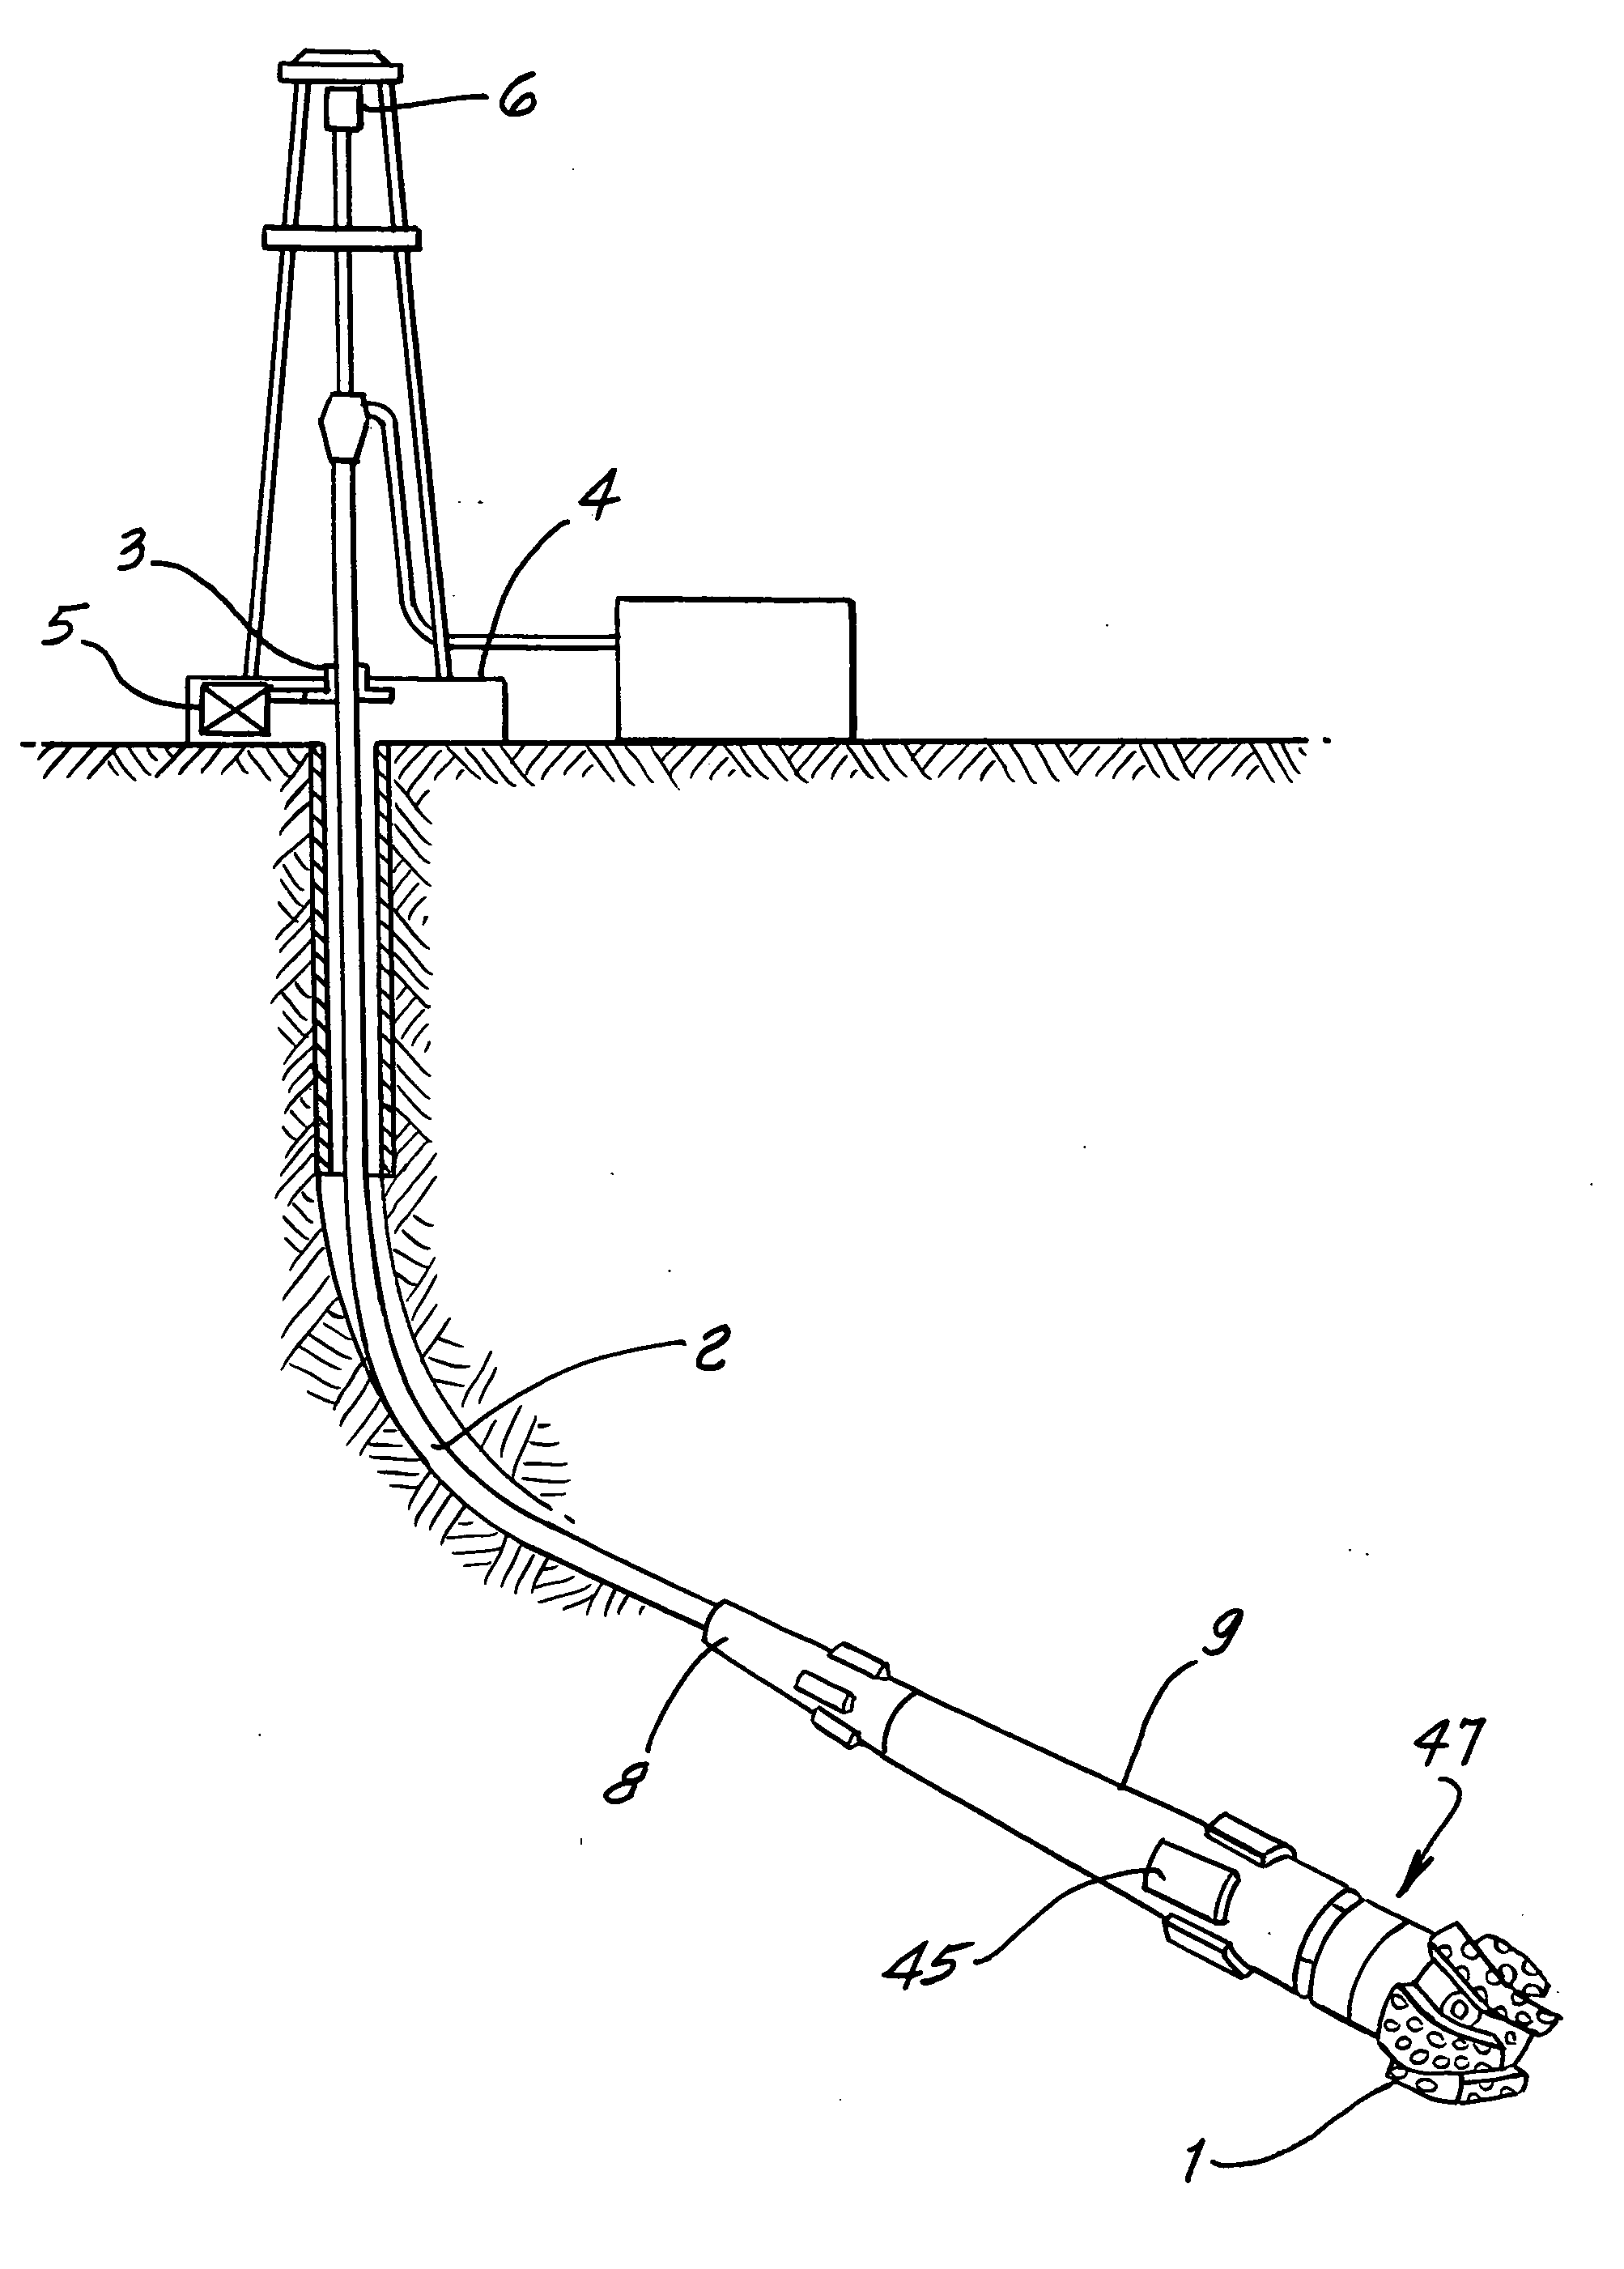 Steerable drilling apparatus having a differential displacement side-force exerting mechanism